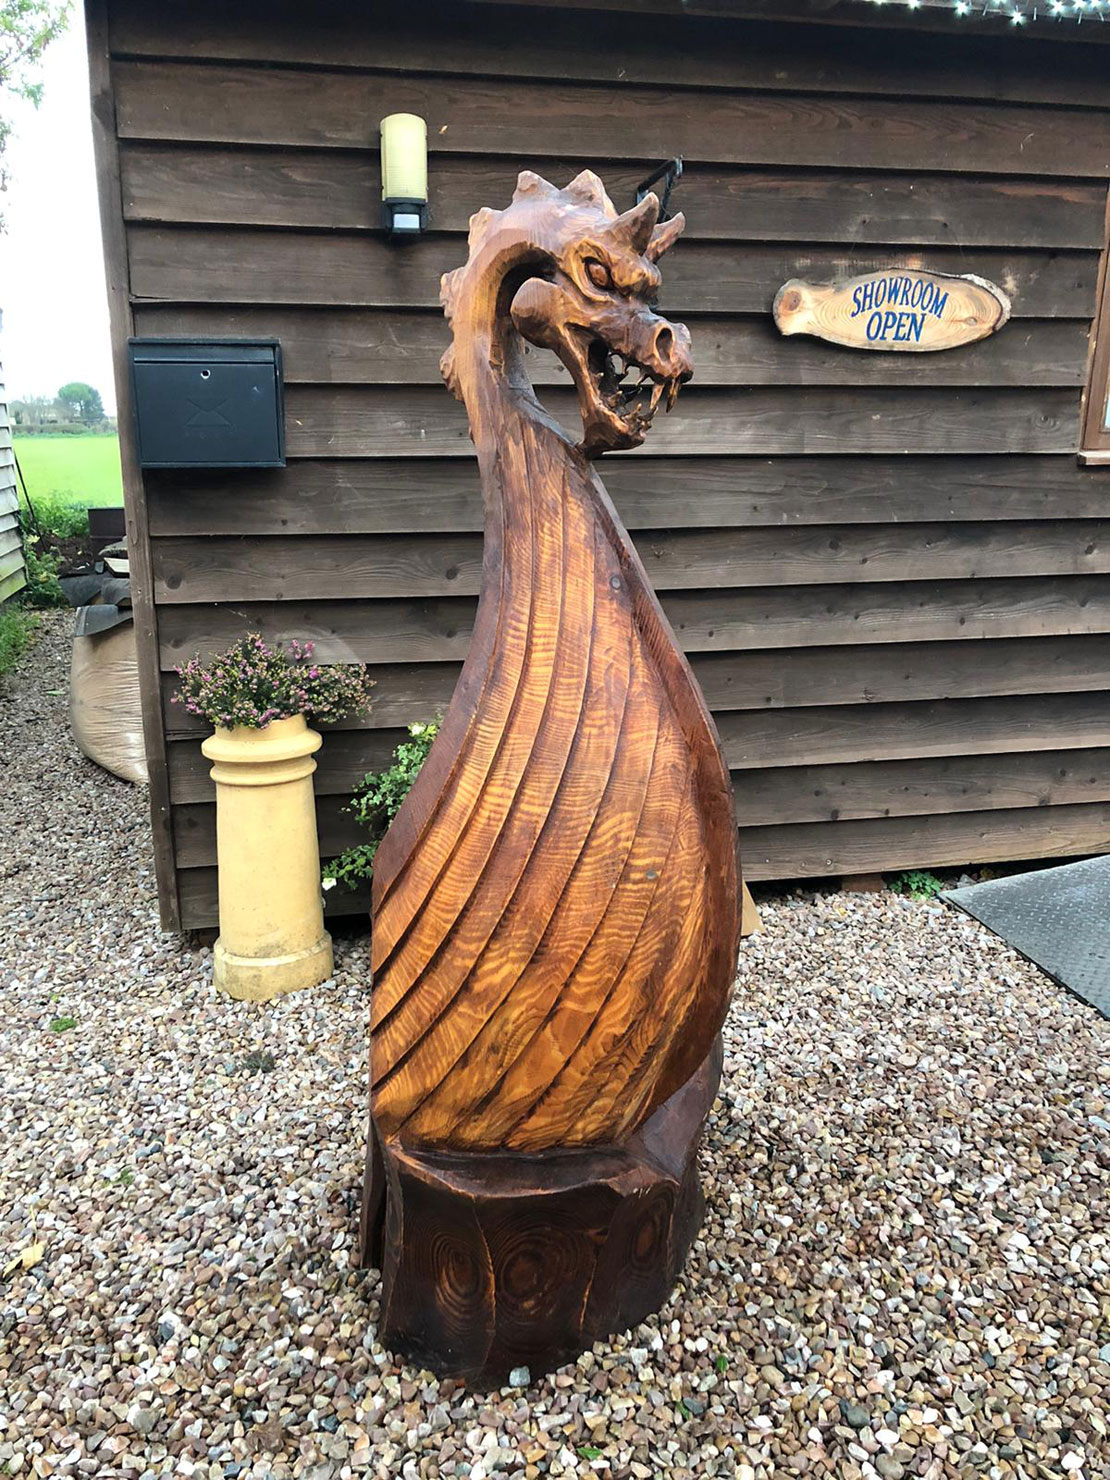 Viking Long boat dragon throne carved by Matthew Crabb Tree Carving Artist